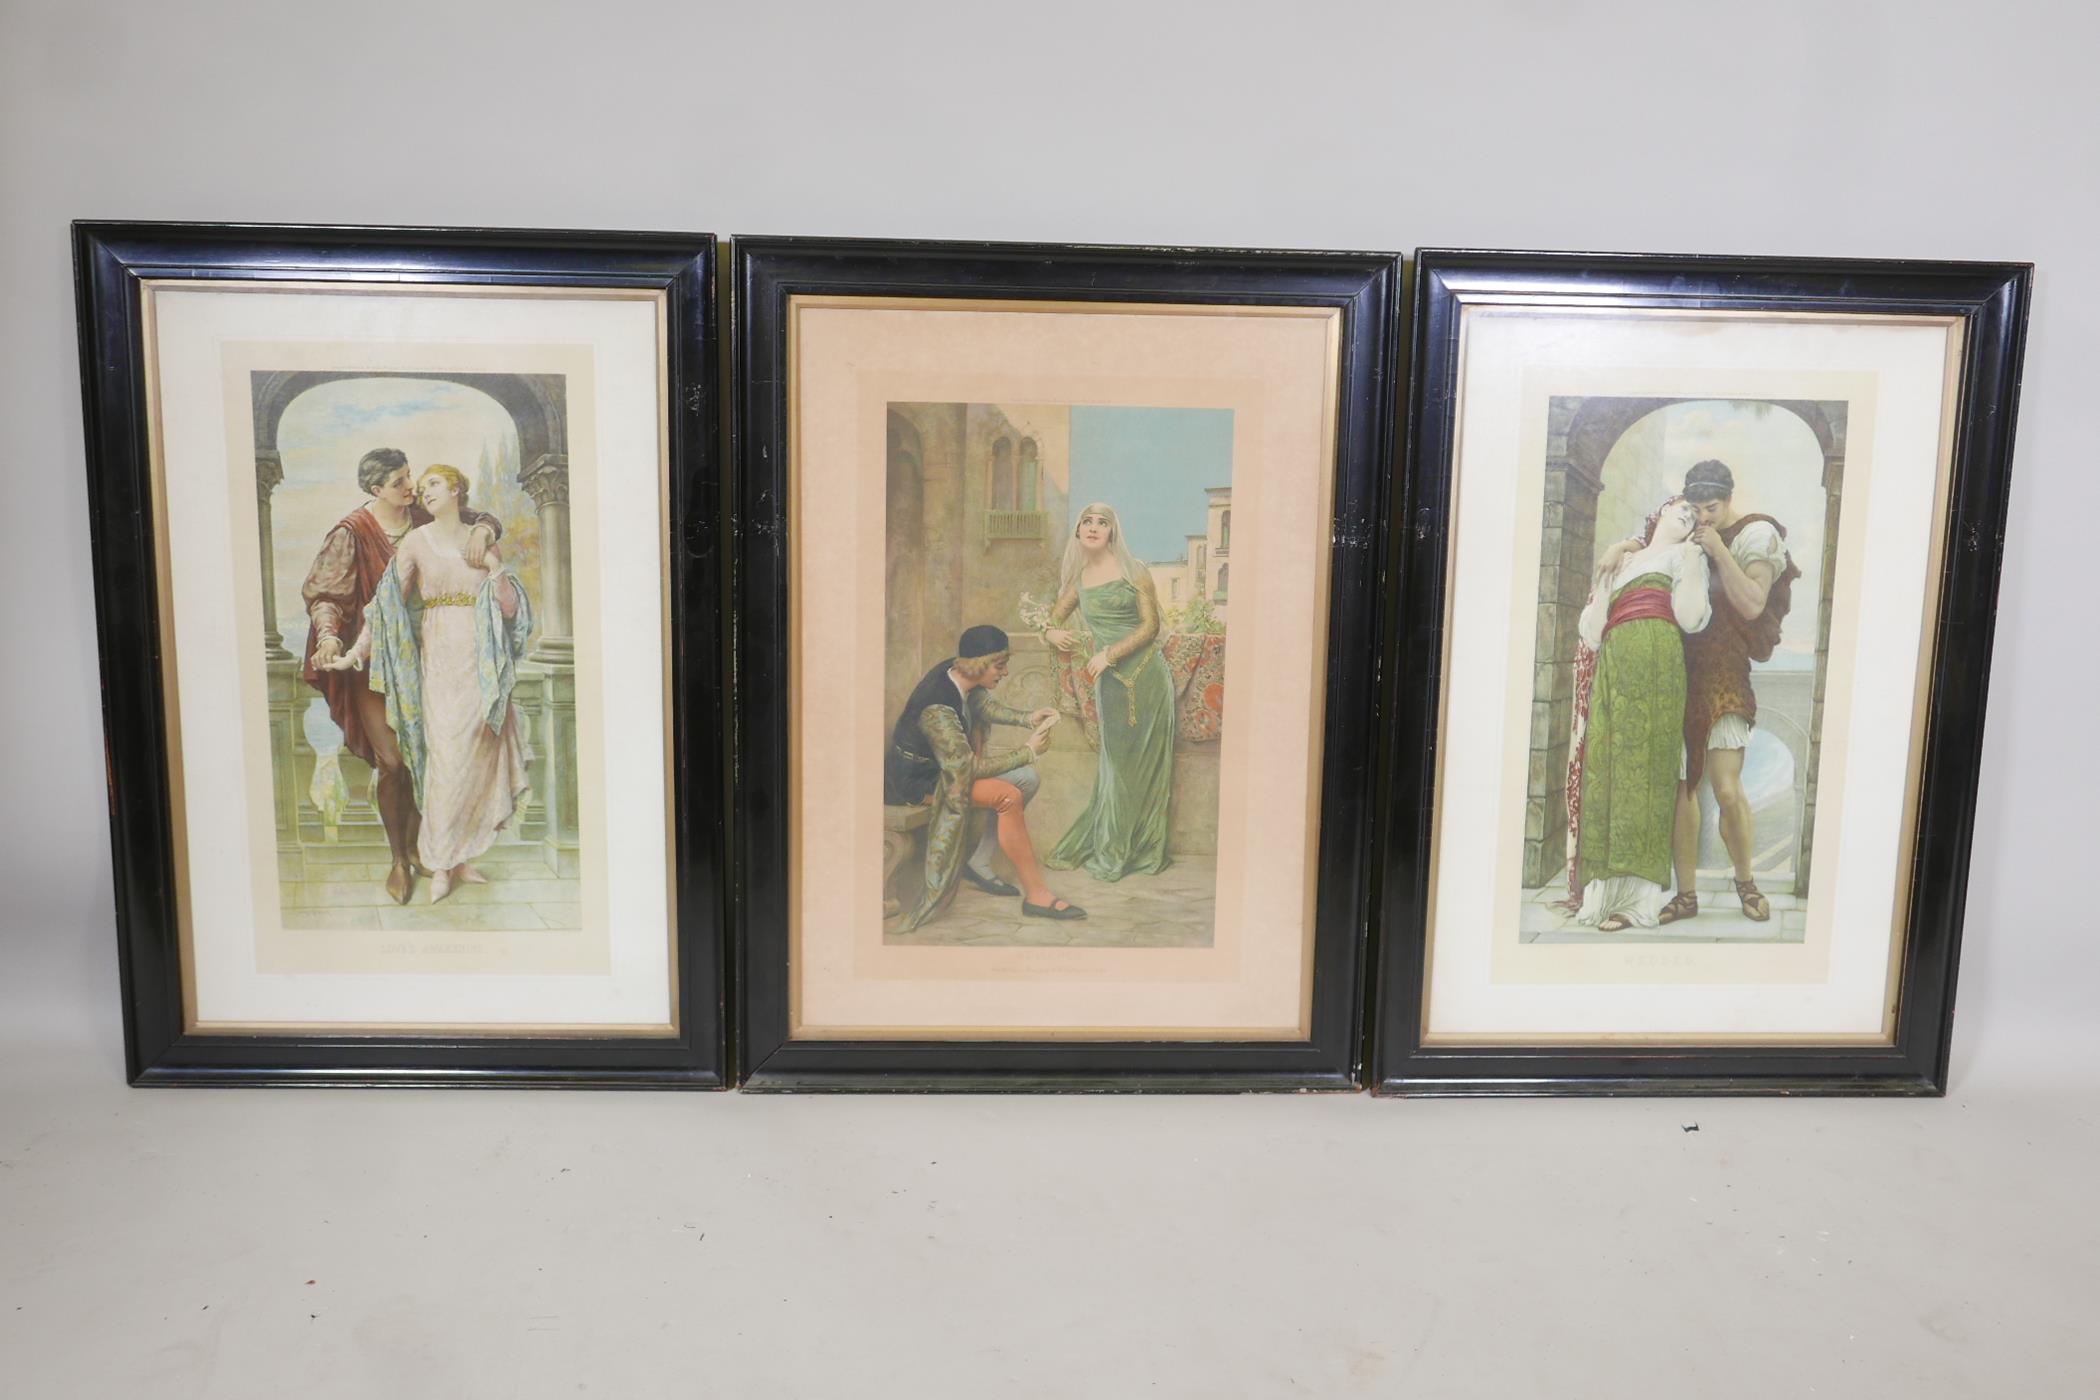 Three Victorian colour prints of courting couples including 'Love's Awakening' after Sydney